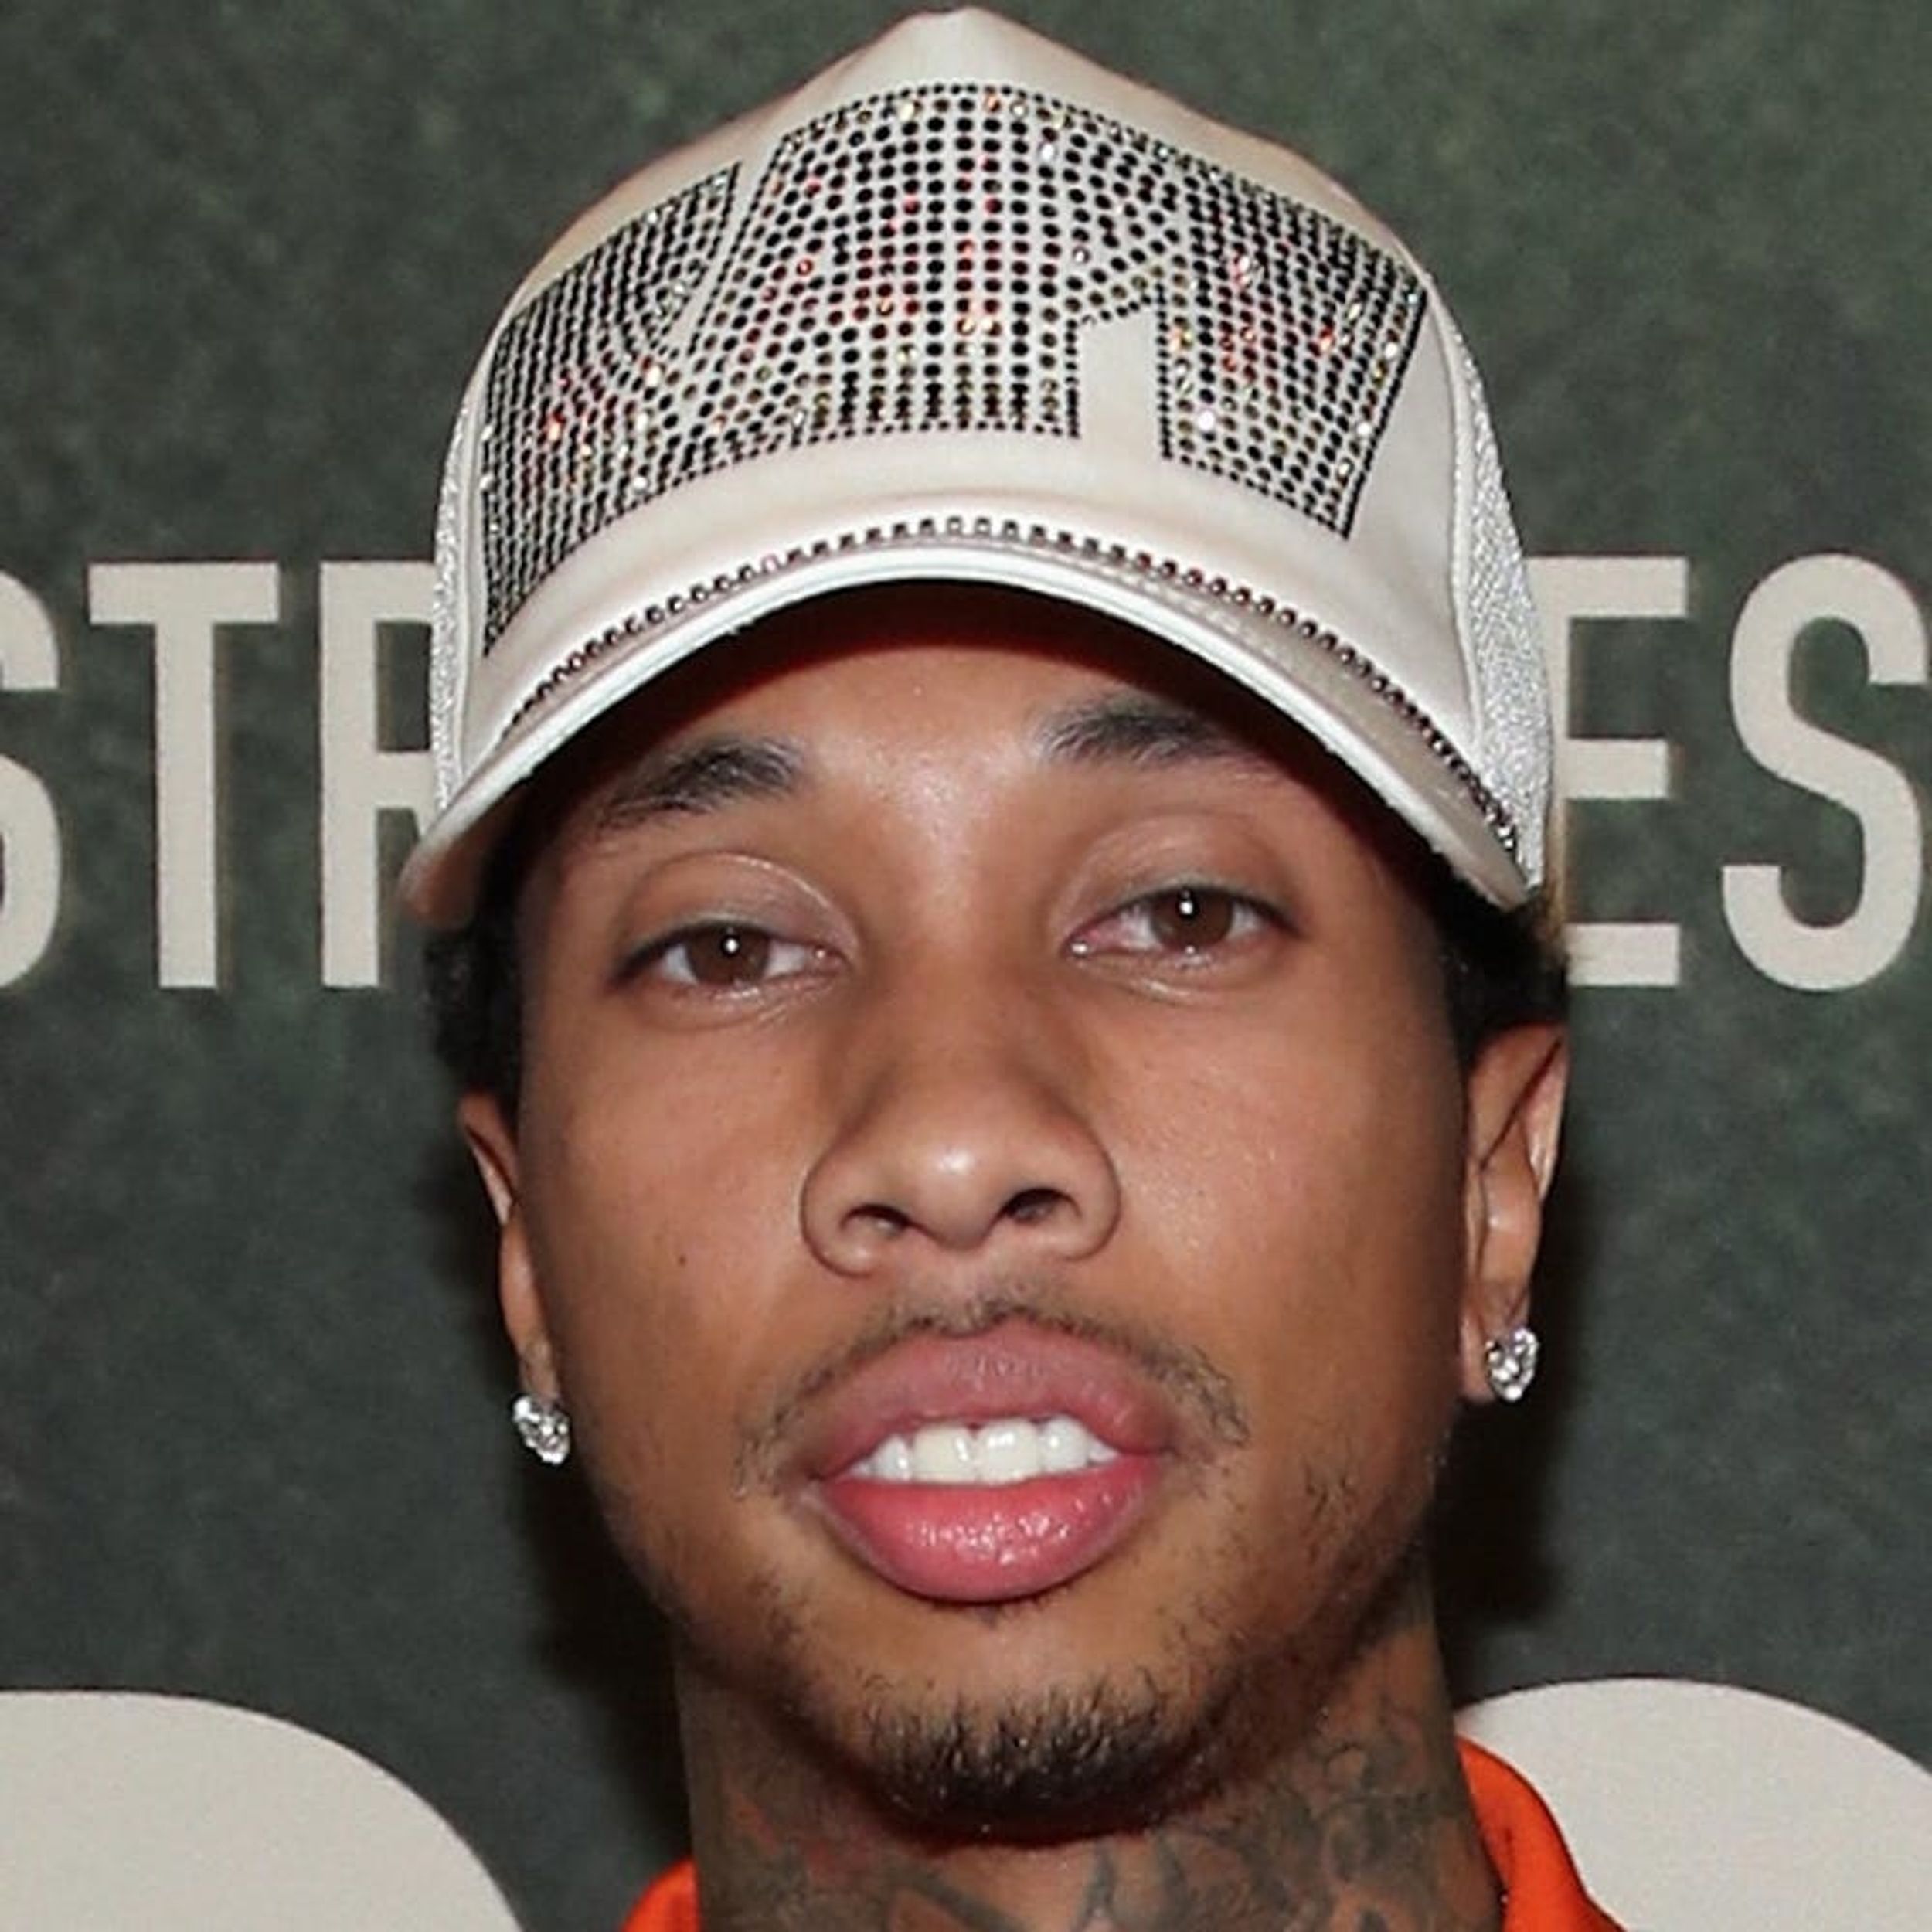 Kylie Jenner’s Ex Tyga Has Broken His Silence on Her Baby